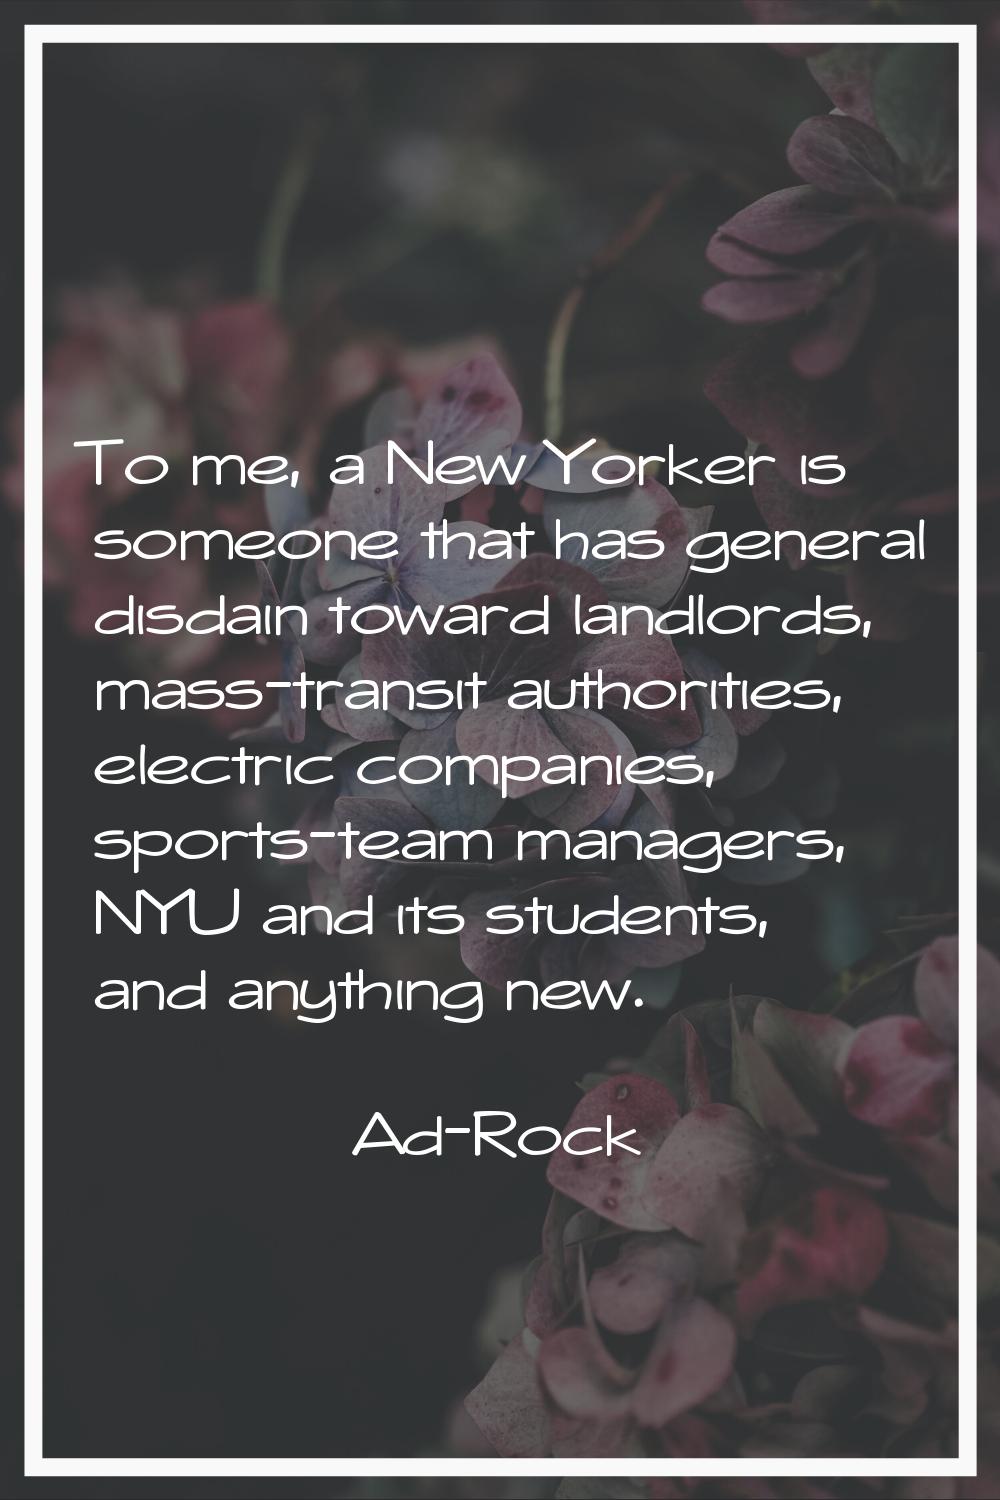 To me, a New Yorker is someone that has general disdain toward landlords, mass-transit authorities,